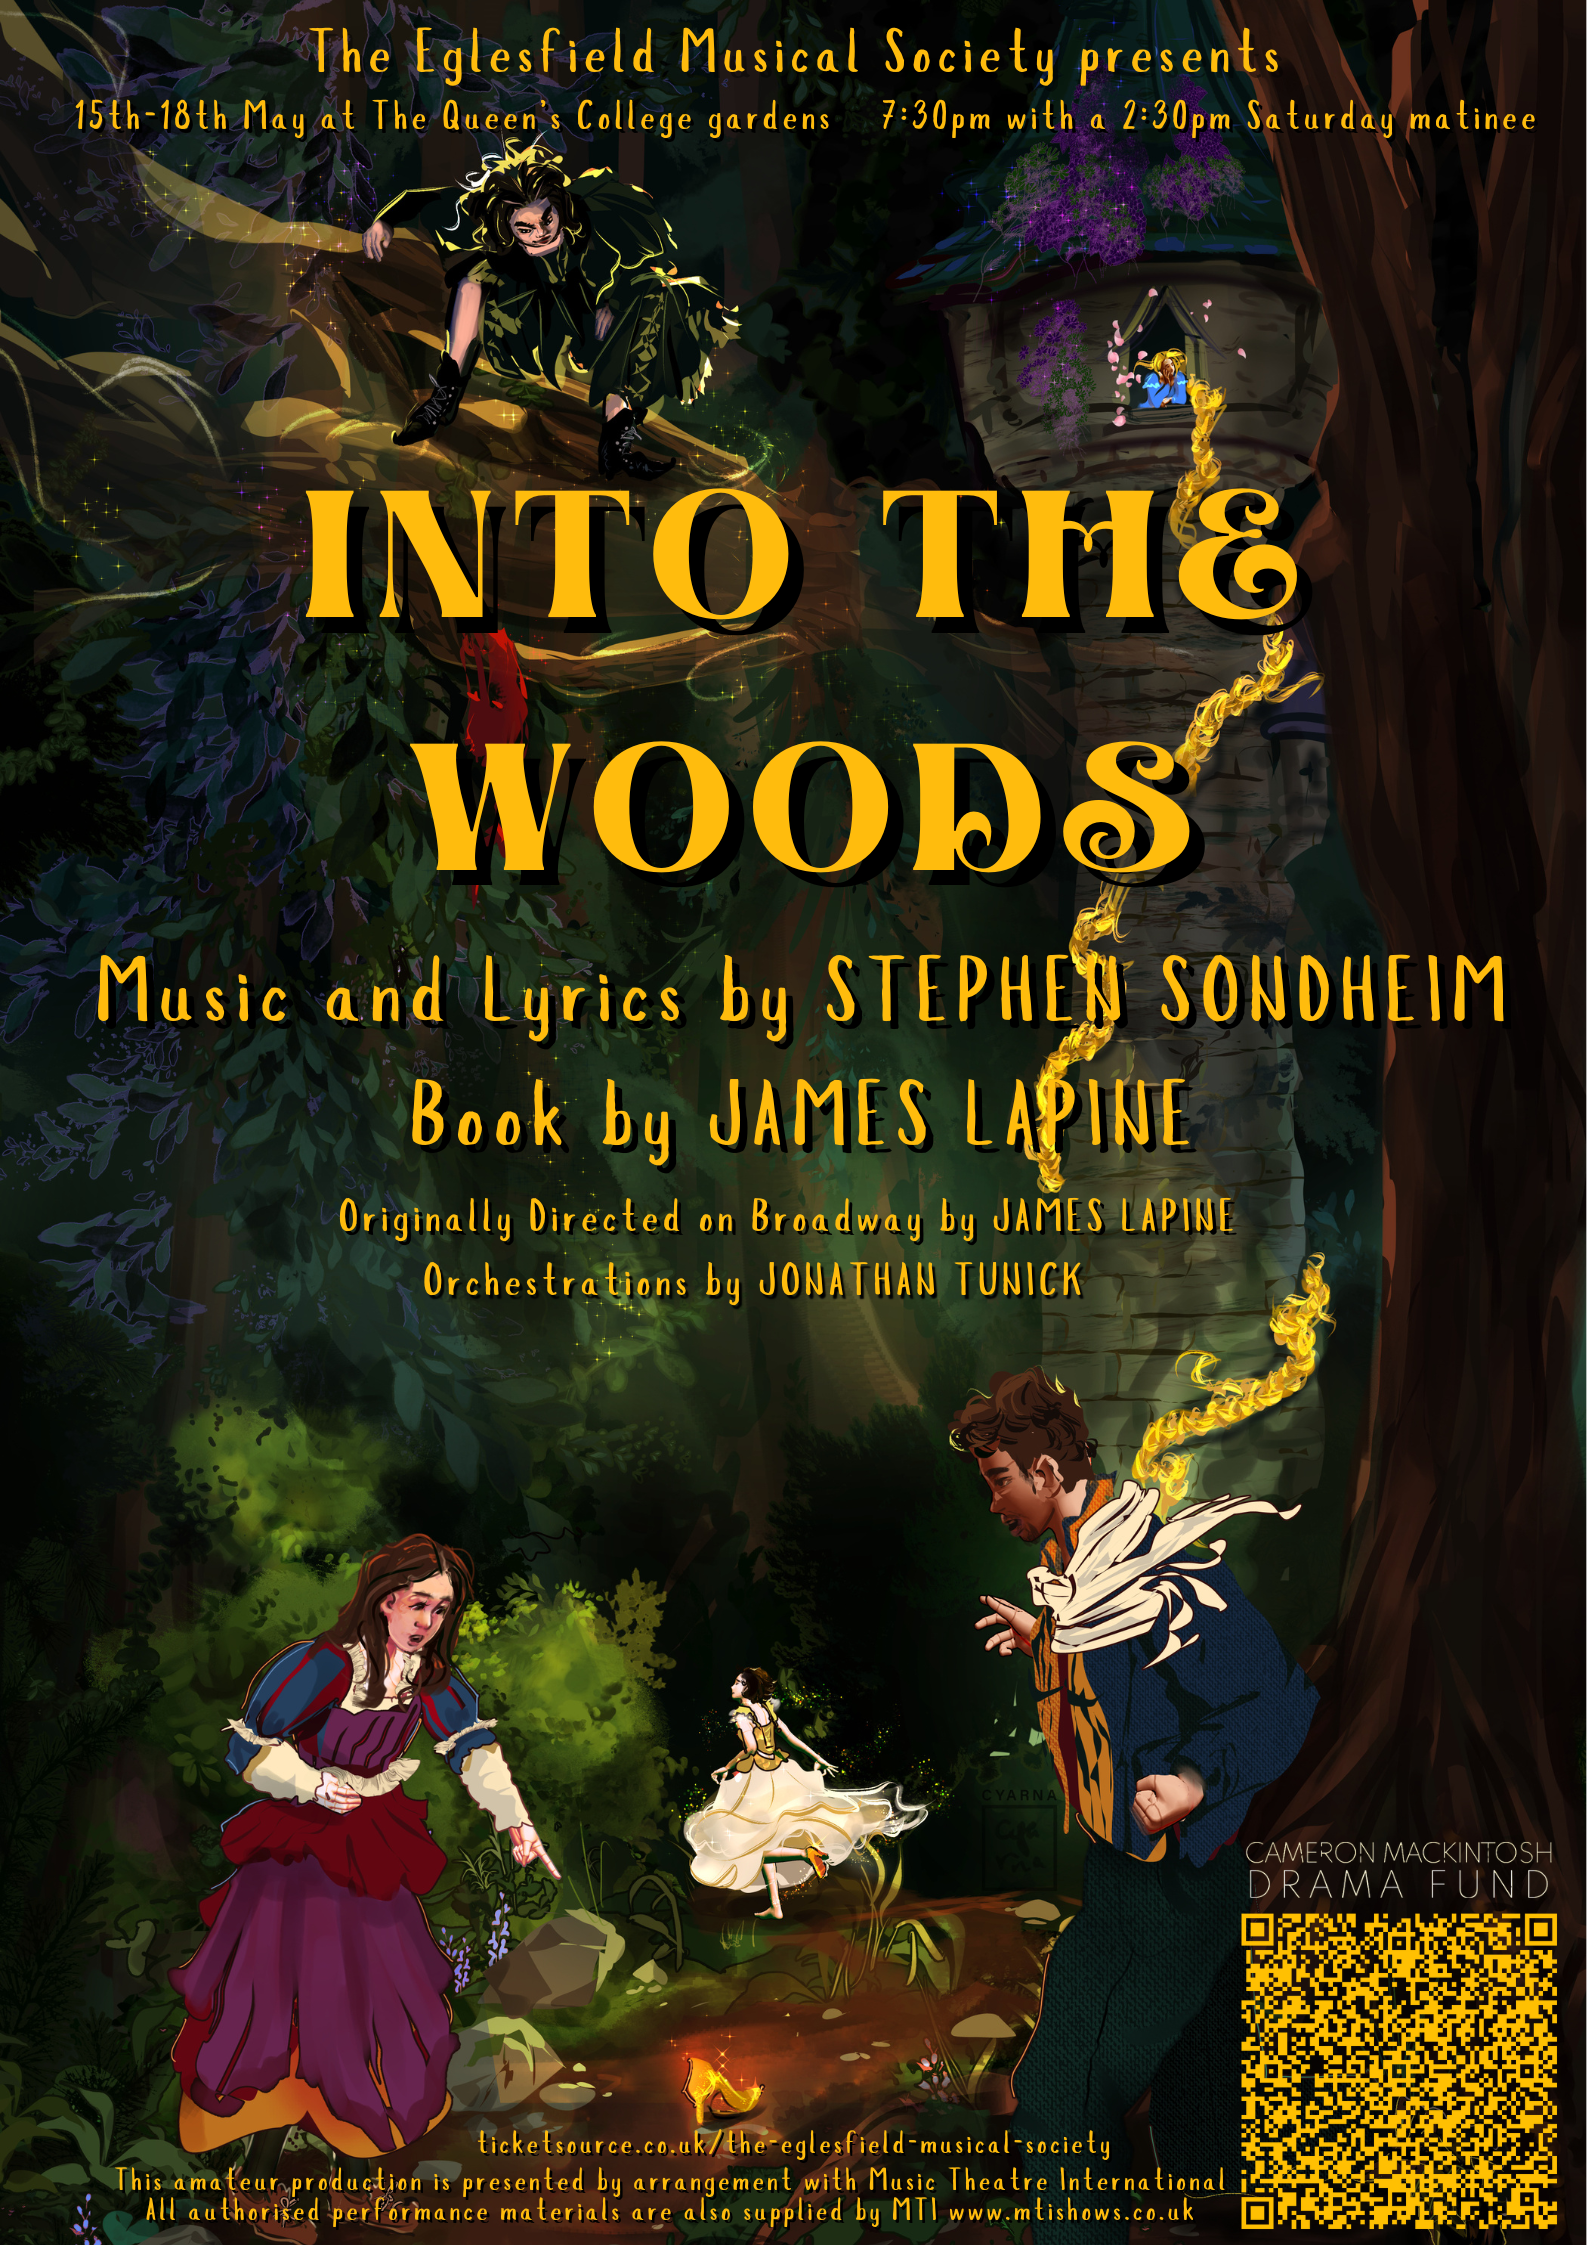 Into the wood poster with illustration of fairytale characters in a dark green lush forest